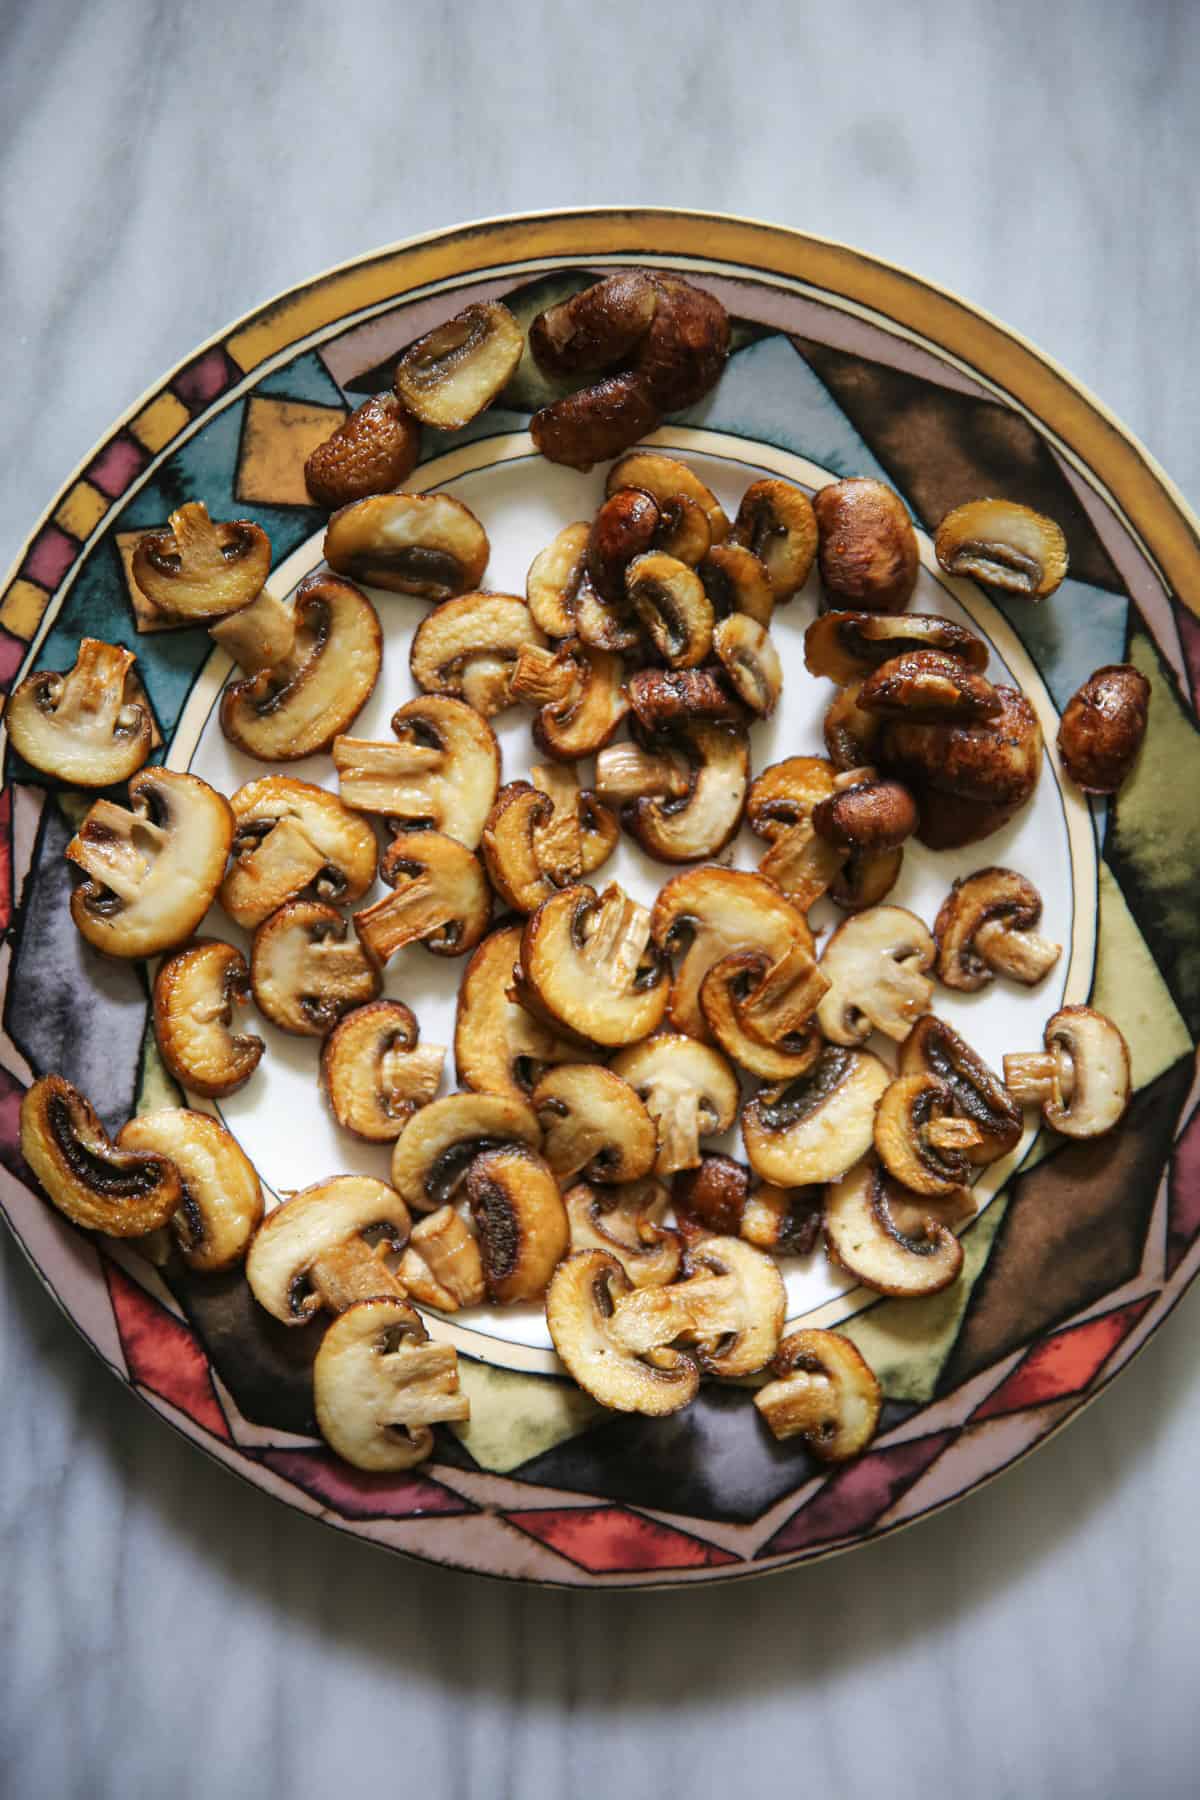 cooked mushrooms on a plate.